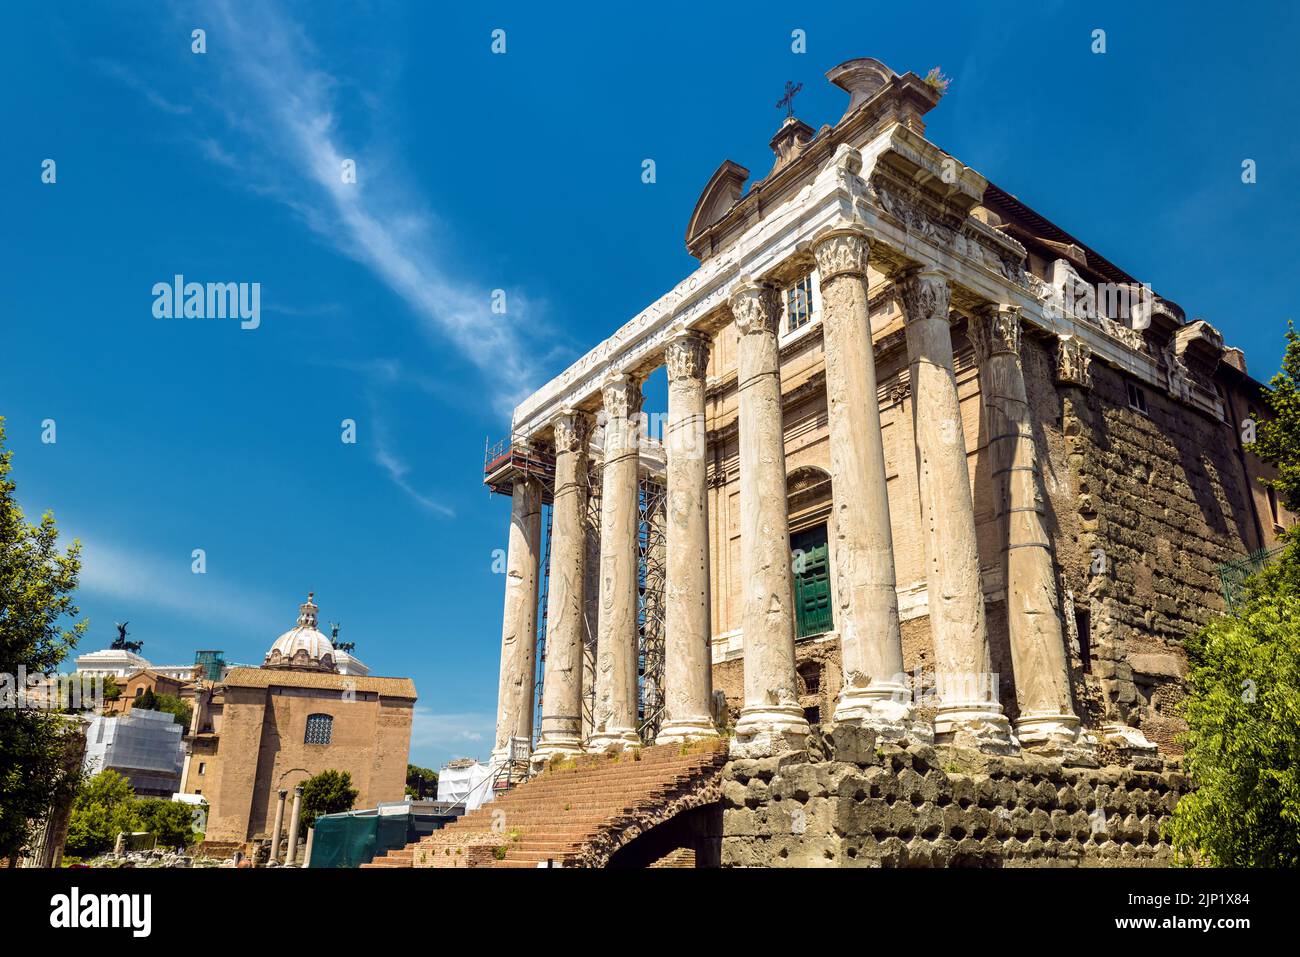 Temple of Antoninus and Faustina on Roman Forum, Rome, Italy. Scenery of Ancient and medieval church, tourist attractions of Rome. Historical building Stock Photo